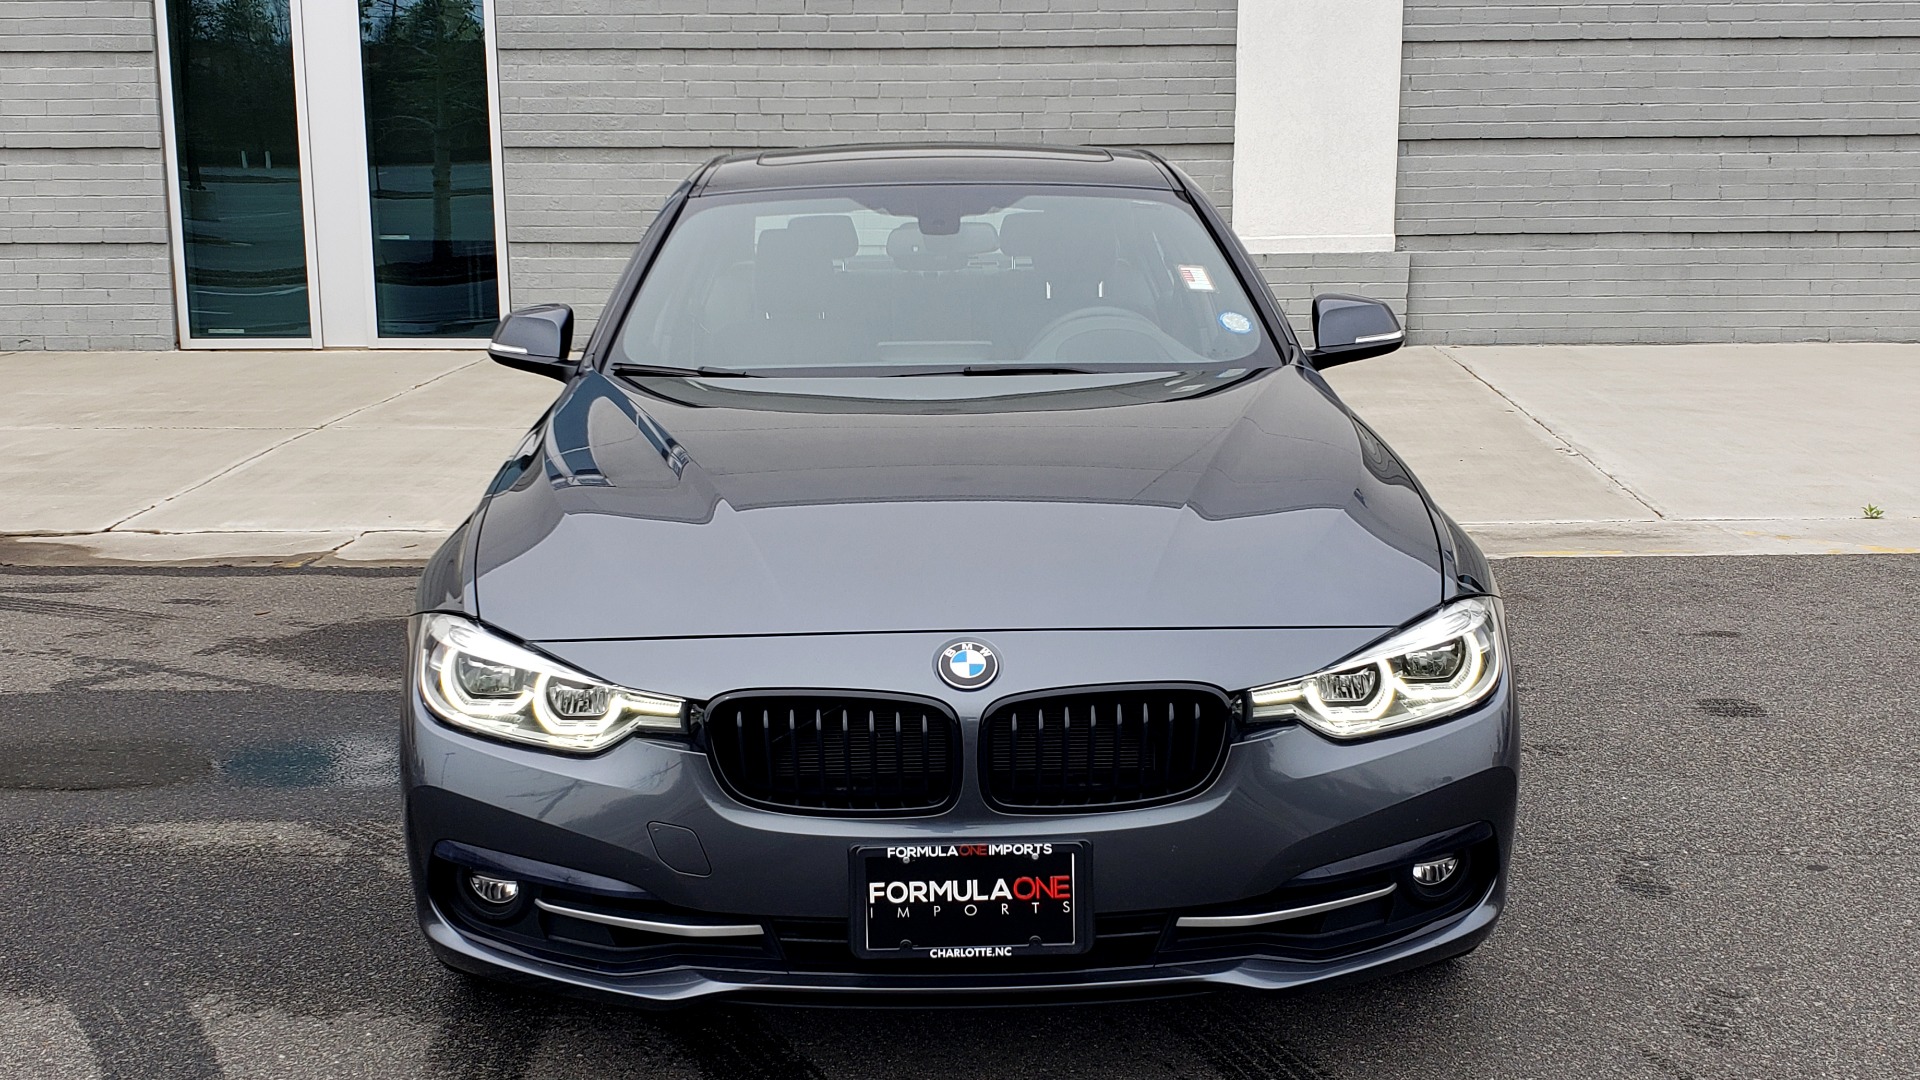 Used 2018 BMW 3 SERIES 330I XDRIVE PREMIUM / CONV PKG NAV / BLIND SPOT / HTD STS / REARVIEW for sale Sold at Formula Imports in Charlotte NC 28227 21